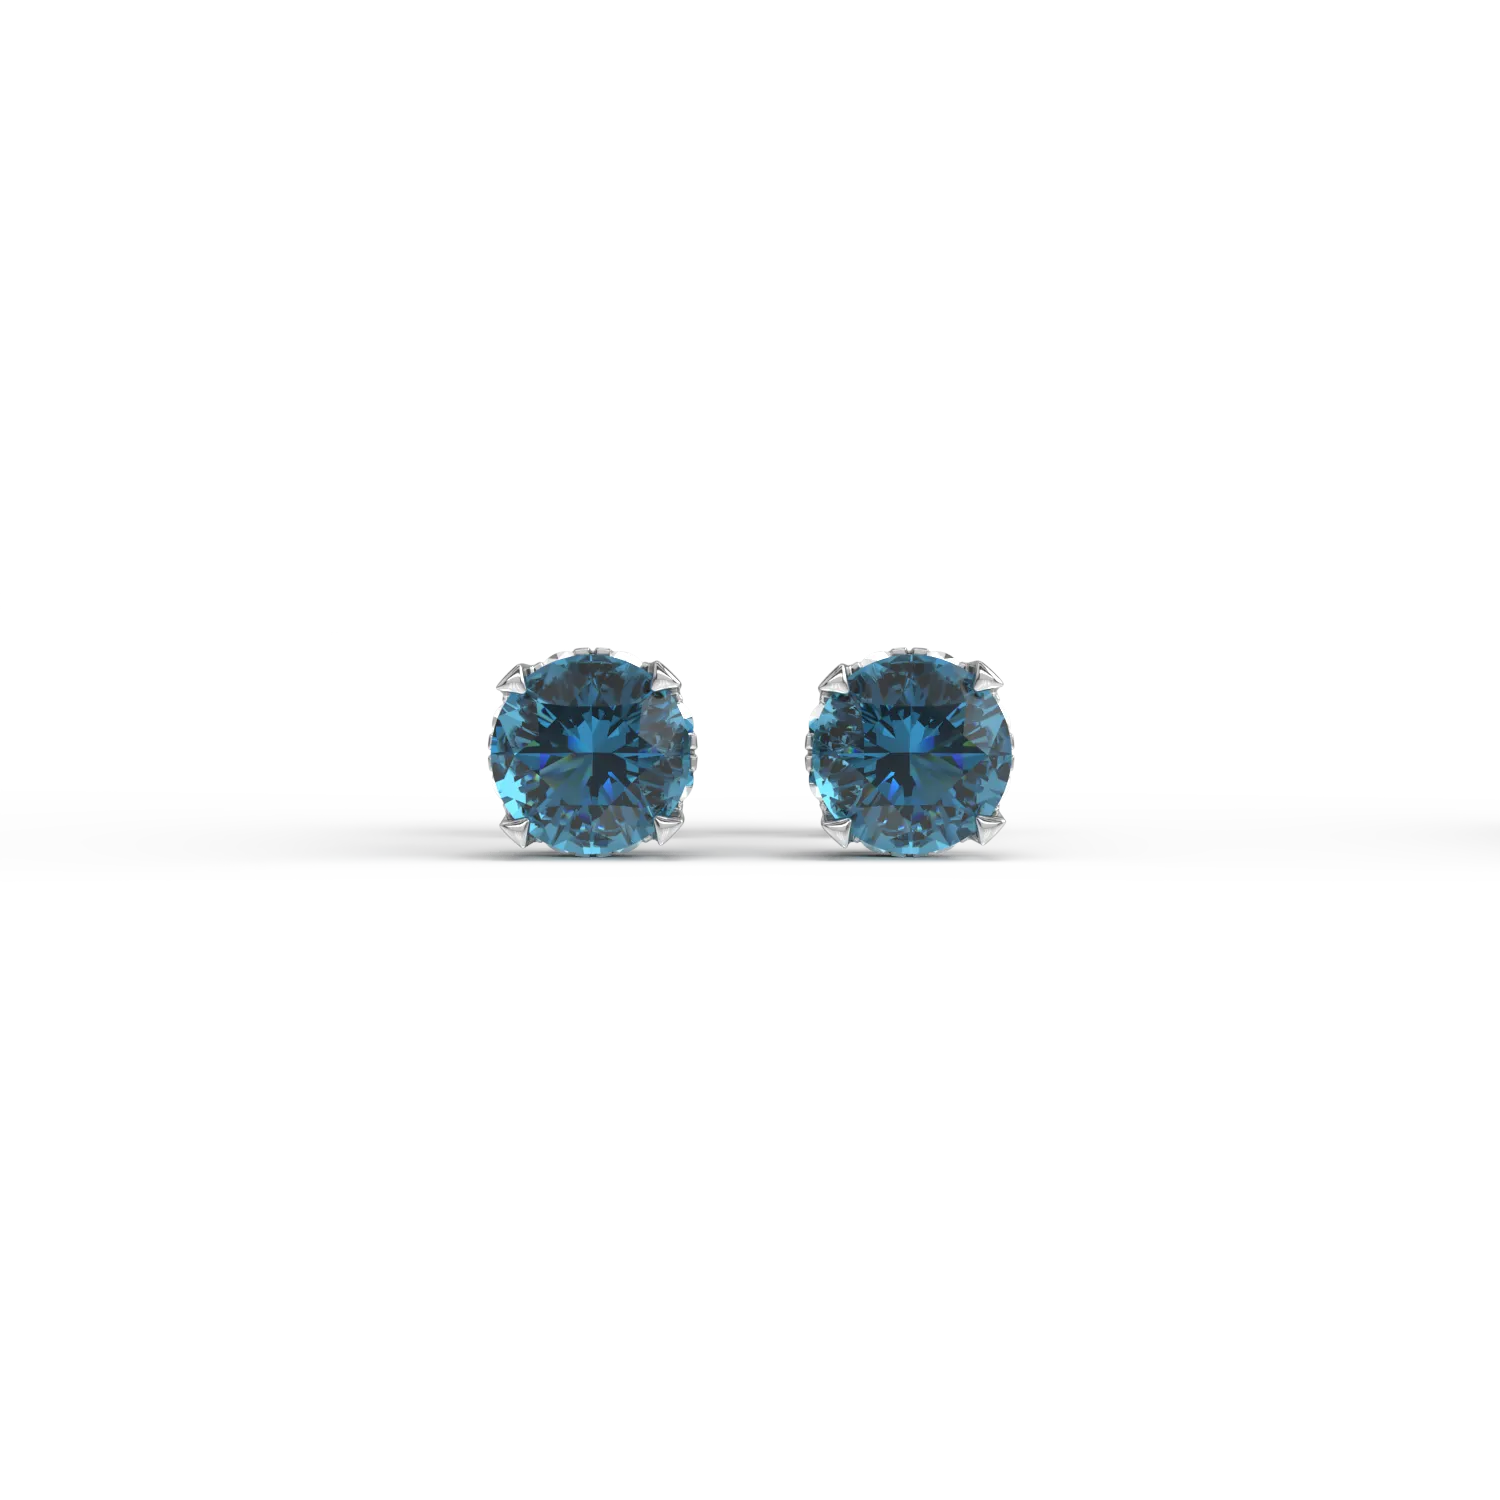 18K white gold earrings with blue diamonds of 0.79ct and clear diamonds of 0.08ct